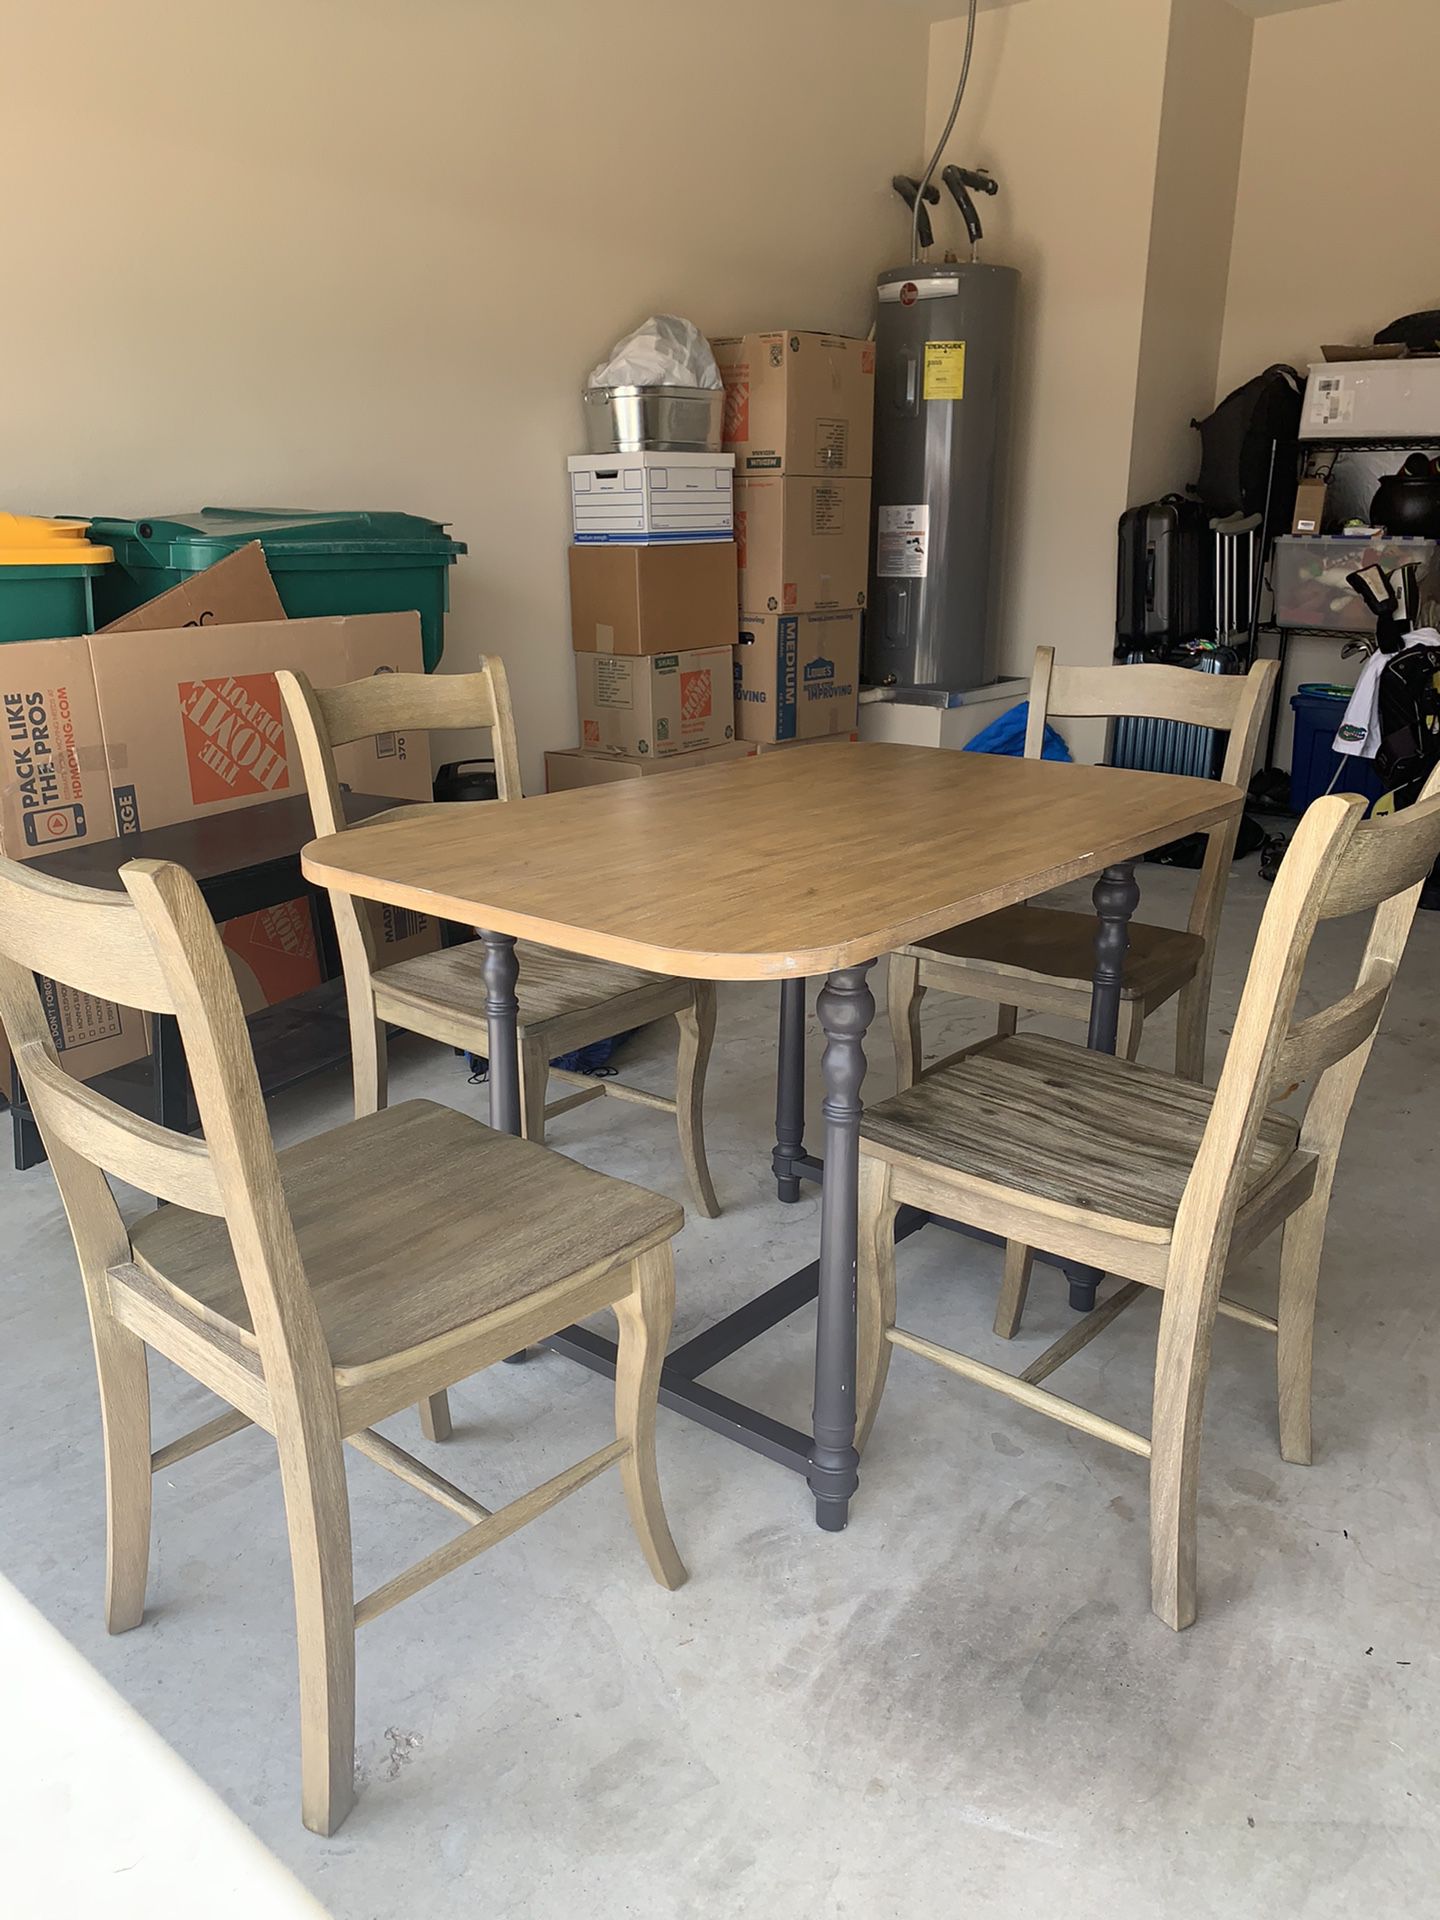 Gently used driftwood table and chairs